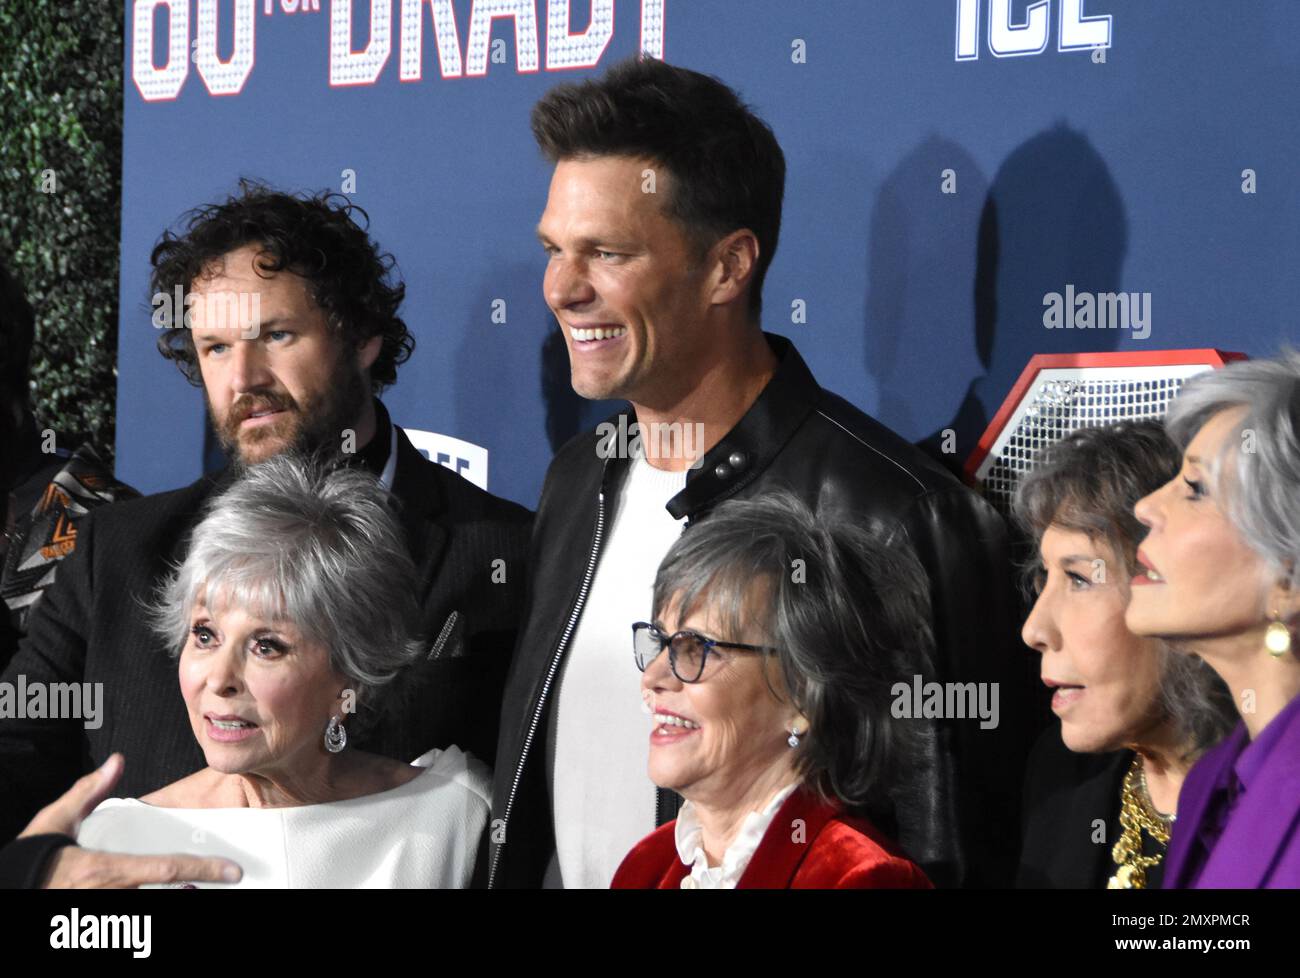 Los Angeles, California, USA 31st January 2023 (L-R) Director Kyle Marvin, Actress Rita Morena, Football Player Tom Brady, Actress Sally Field, Actress Lily Tomlin and Actress Jane Fonda attend the Los Angeles Premiere Screening of Paramount Pictures' '80 for Brady' at Regency Village Theatre on January 31, 2023 in Los Angeles, California, USA. Photo by Barry King/Alamy Stock Photo Stock Photo